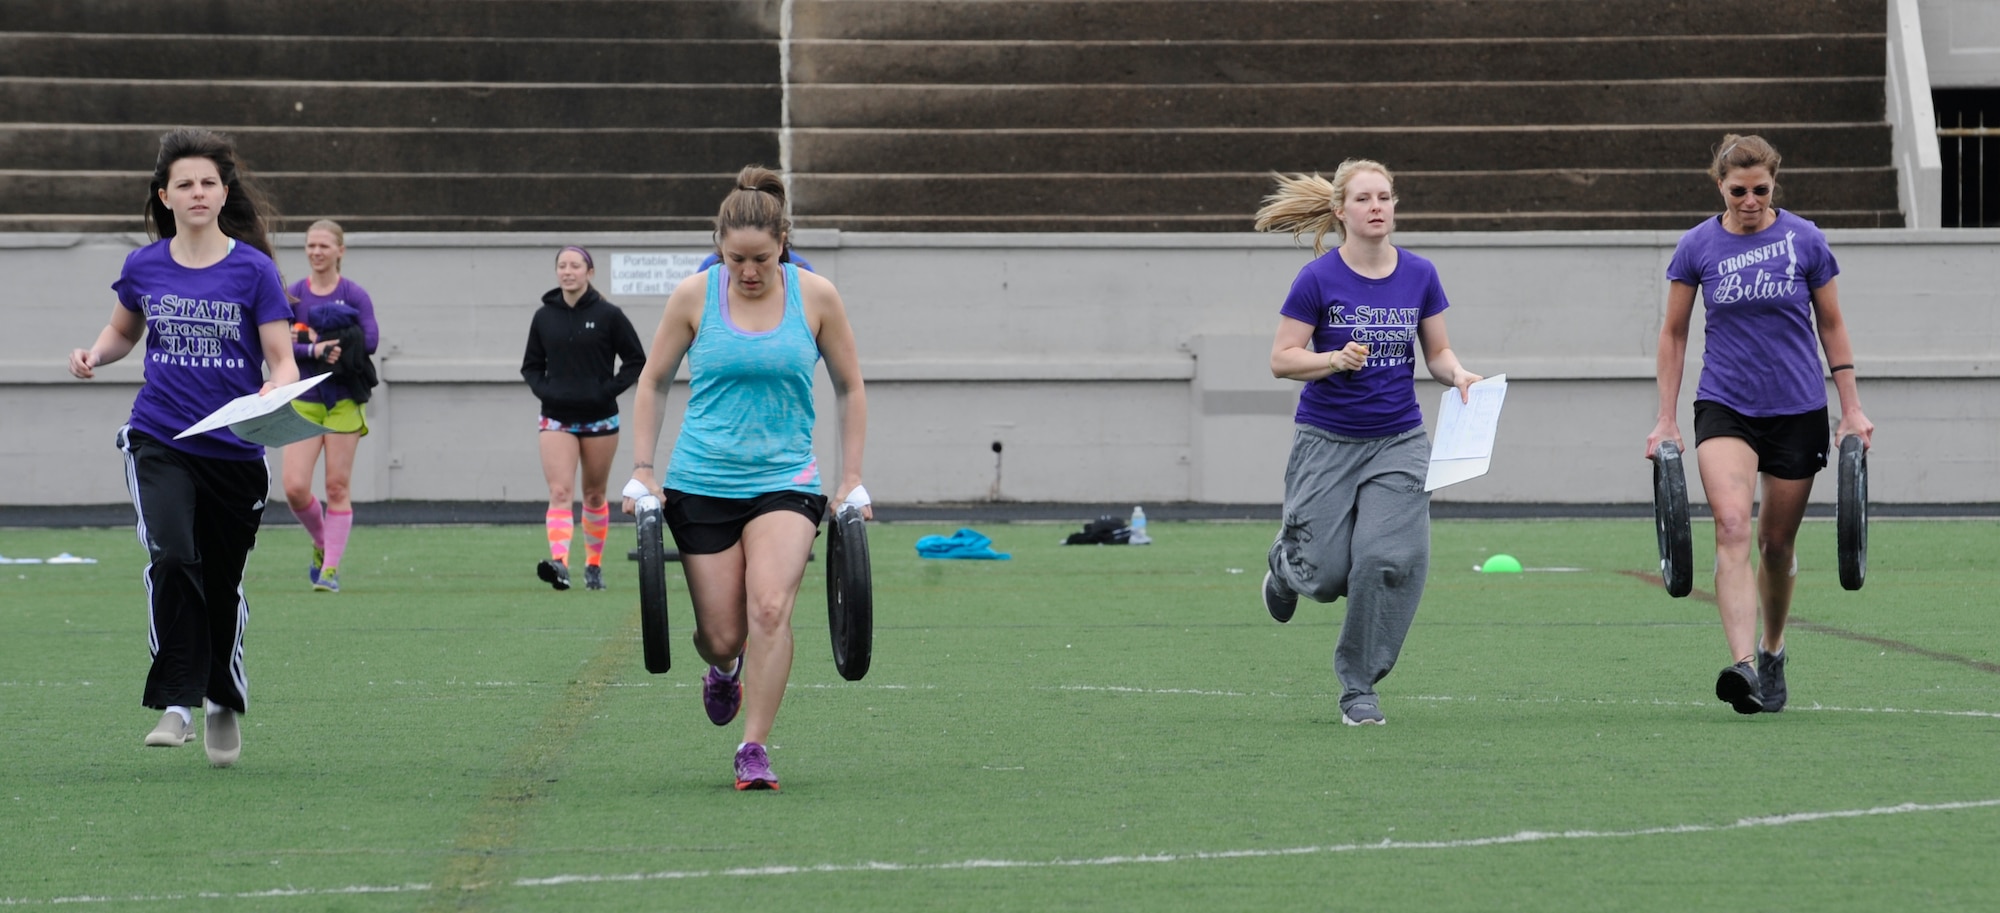 Staff Sgt. Samantha Scott, 509th Bomb Wing Command Post training manager, and her teammate race with 25-pound plates across a football field during the K-State CrossFit Challenge in Manhattan, Kan., April 27, 2013.  After dropping the weights, the participants ran the bleachers eight times, doing burpees between each set. (U.S. Air Force photo by Staff Sgt. Alexandra M. Boutte/Released)